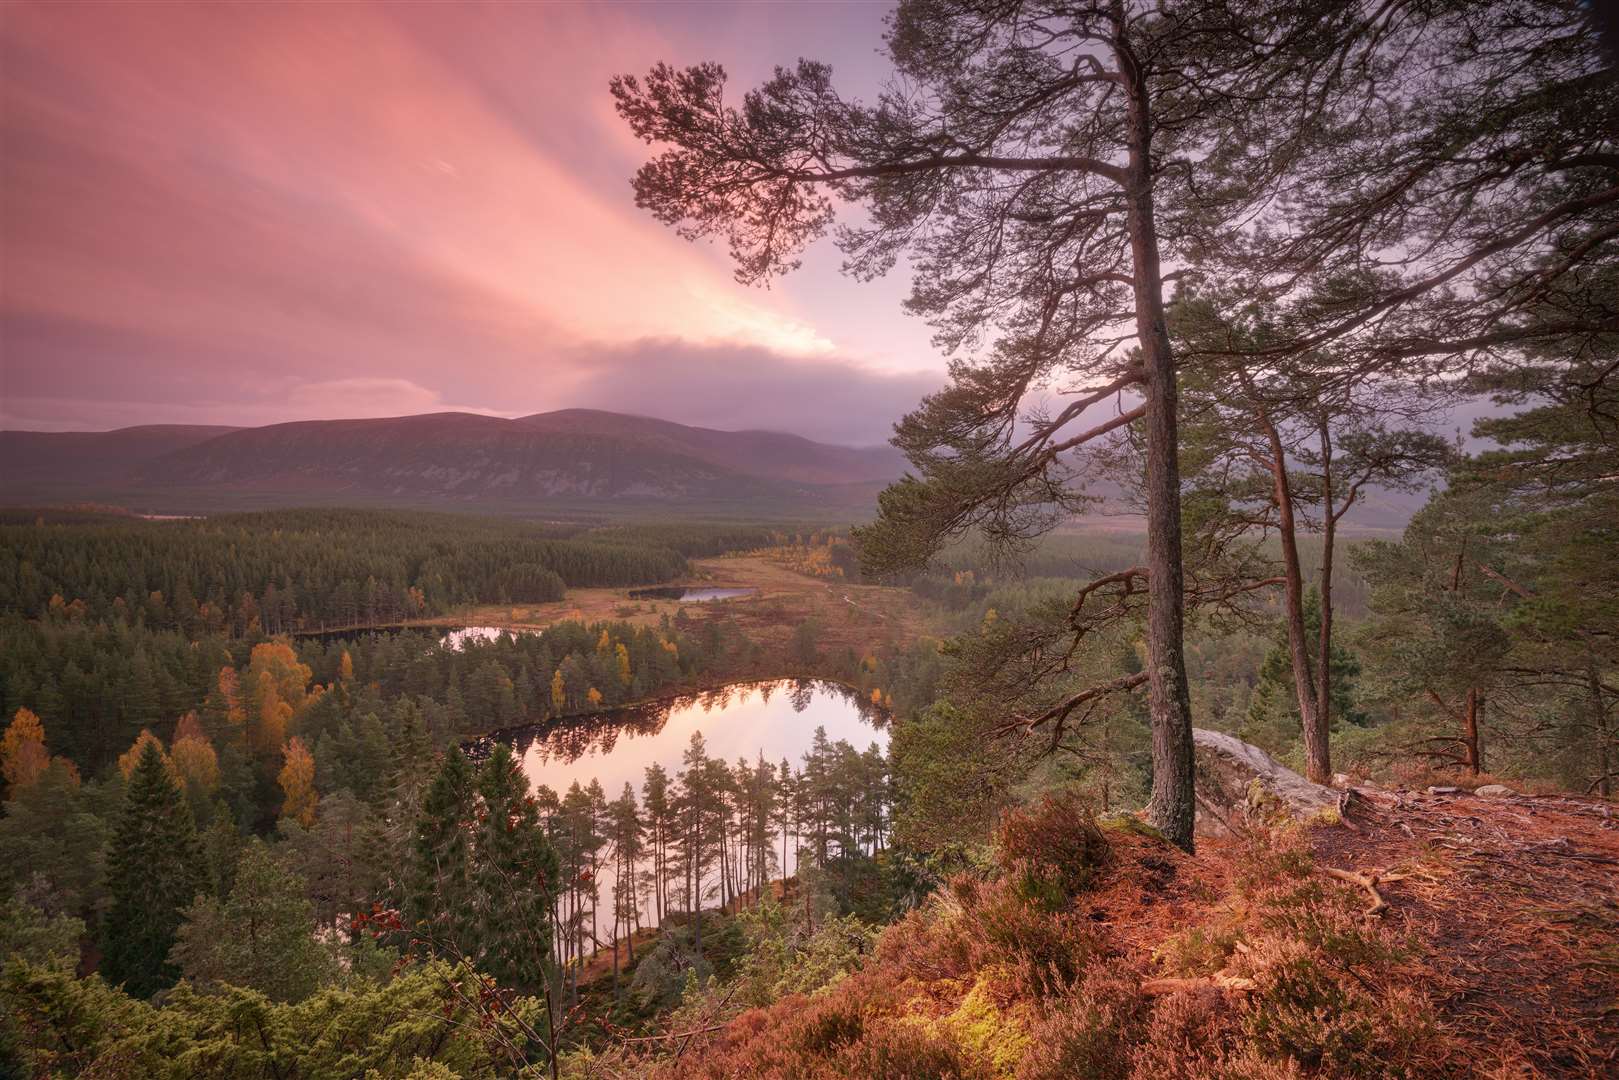 Uath Lochans from Farleitter Crag, Kingussie. Picture by: VisitScotland / Damian Shields